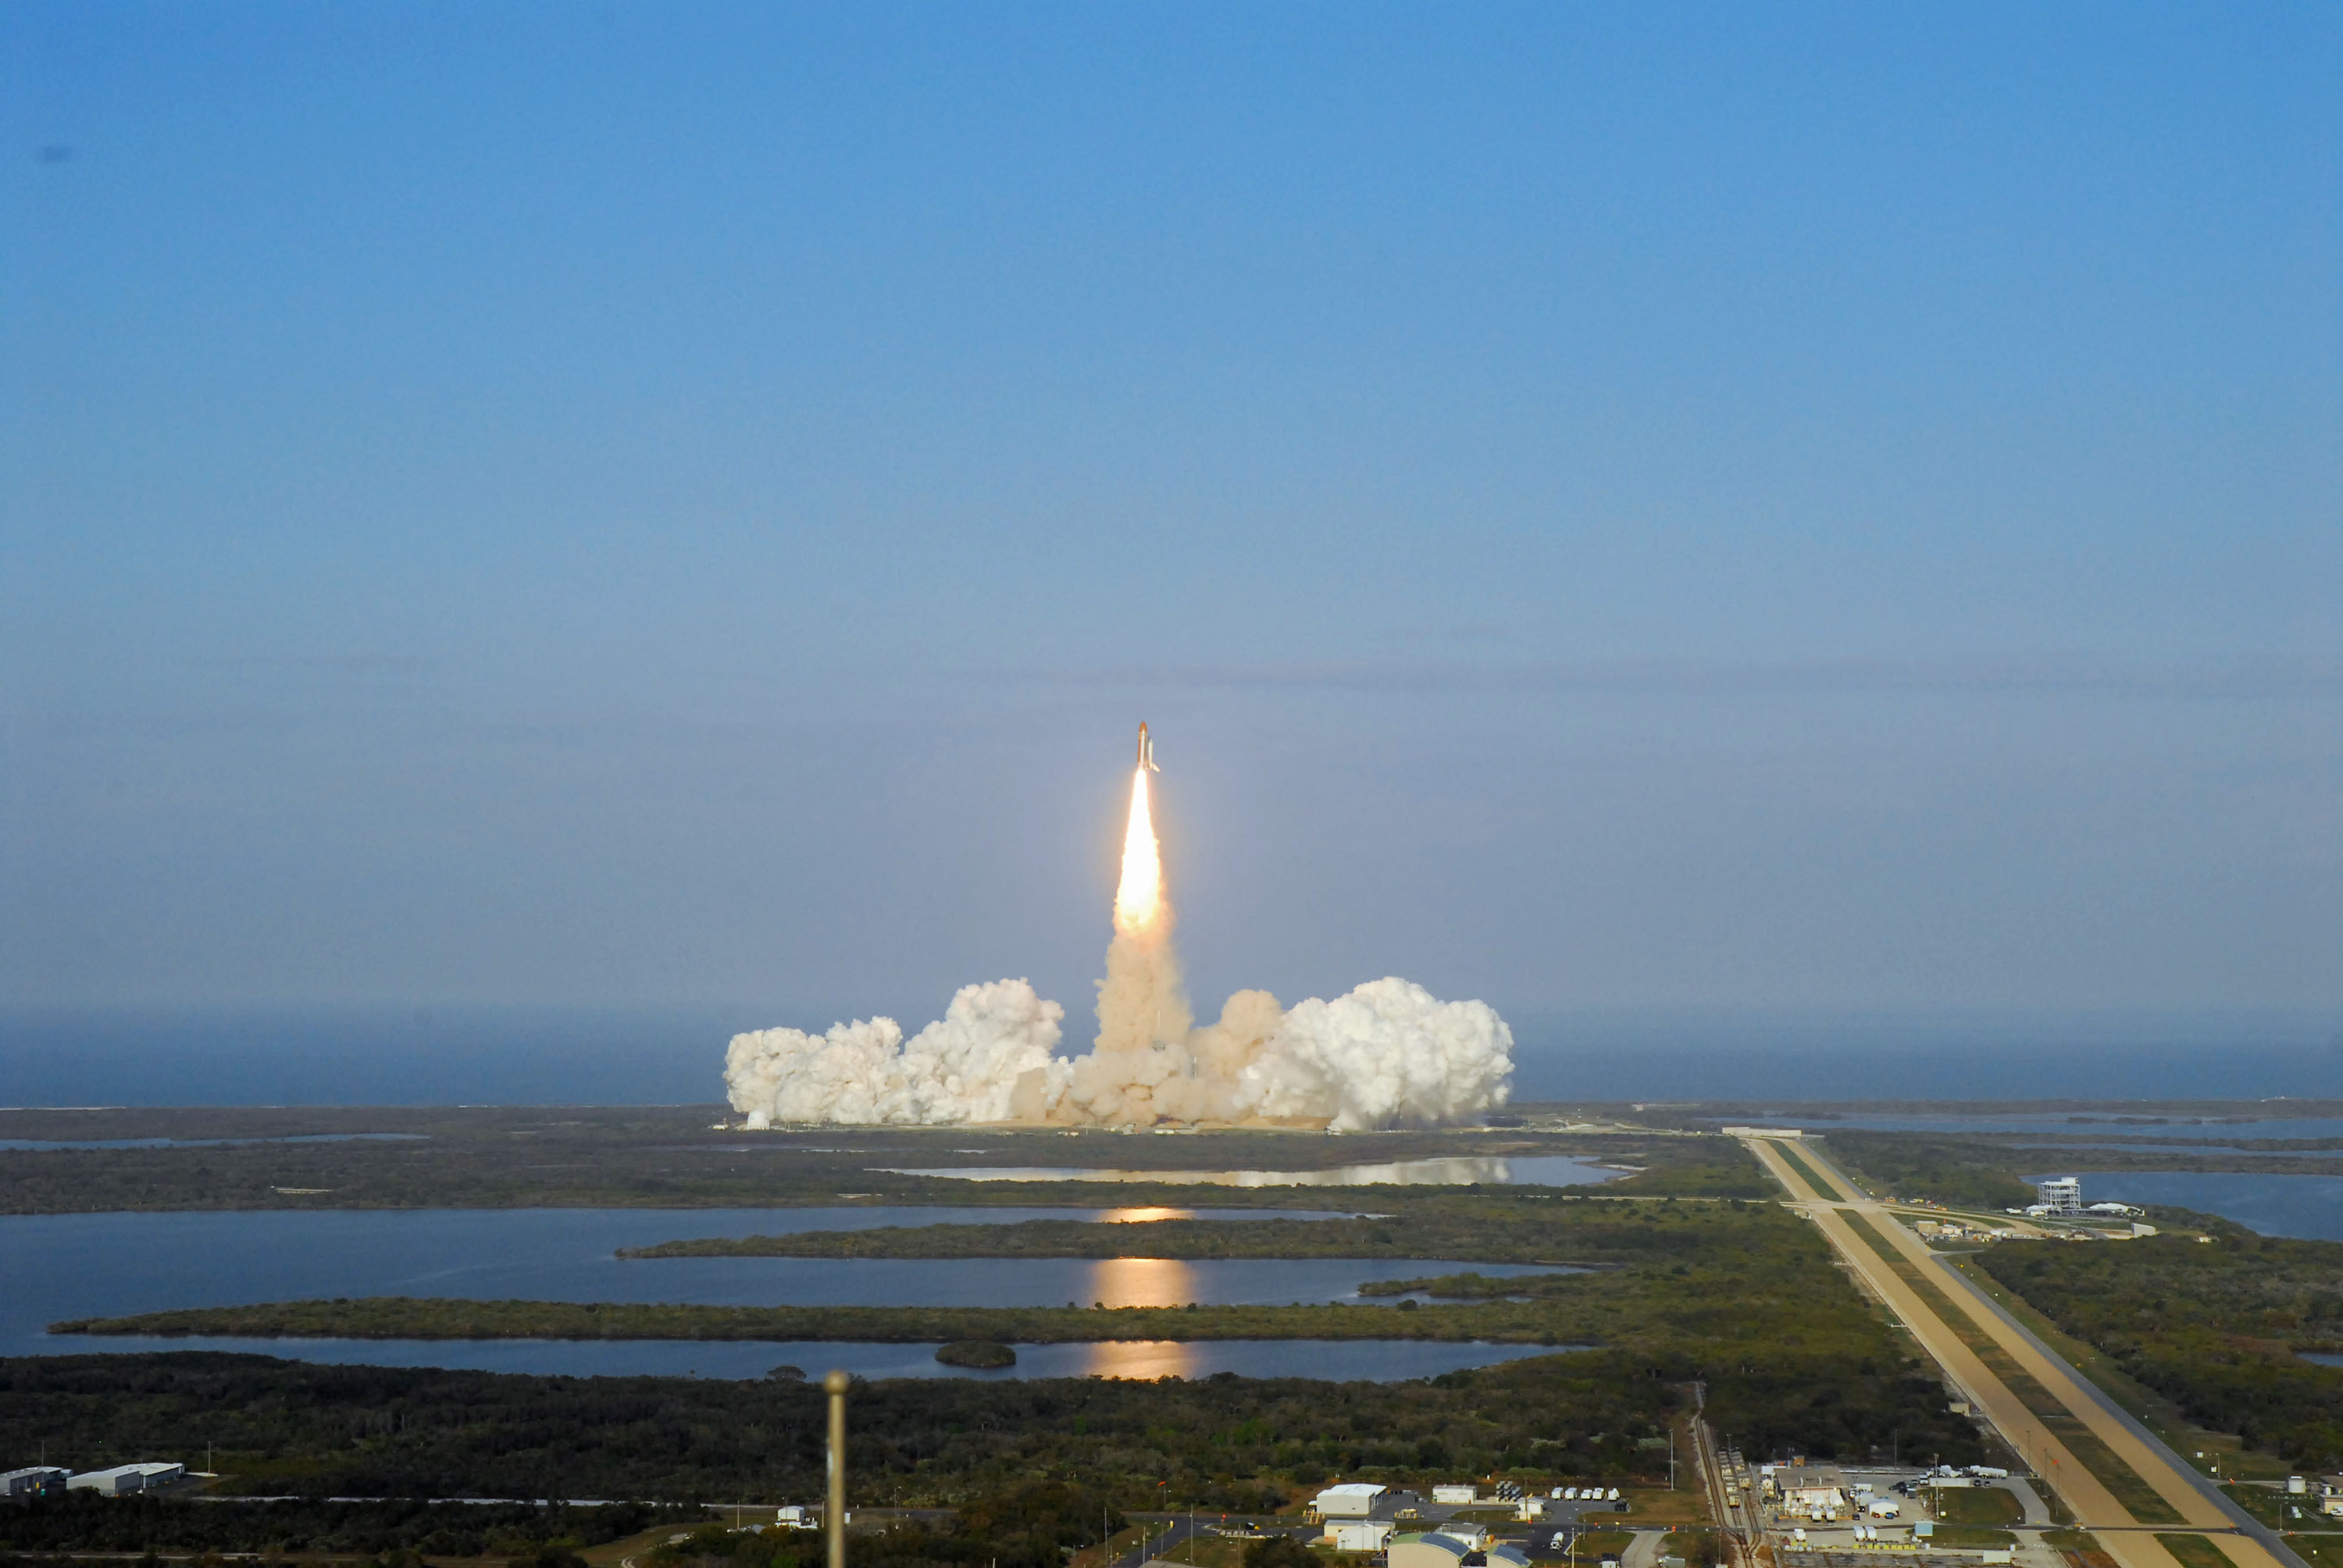 Space Shuttle Discovery is launched from Launch Complex 39A, Kennedy Space Center, at 4:53:24 p.m., Eastern Standard Time, 24 February 2011. (NASA)